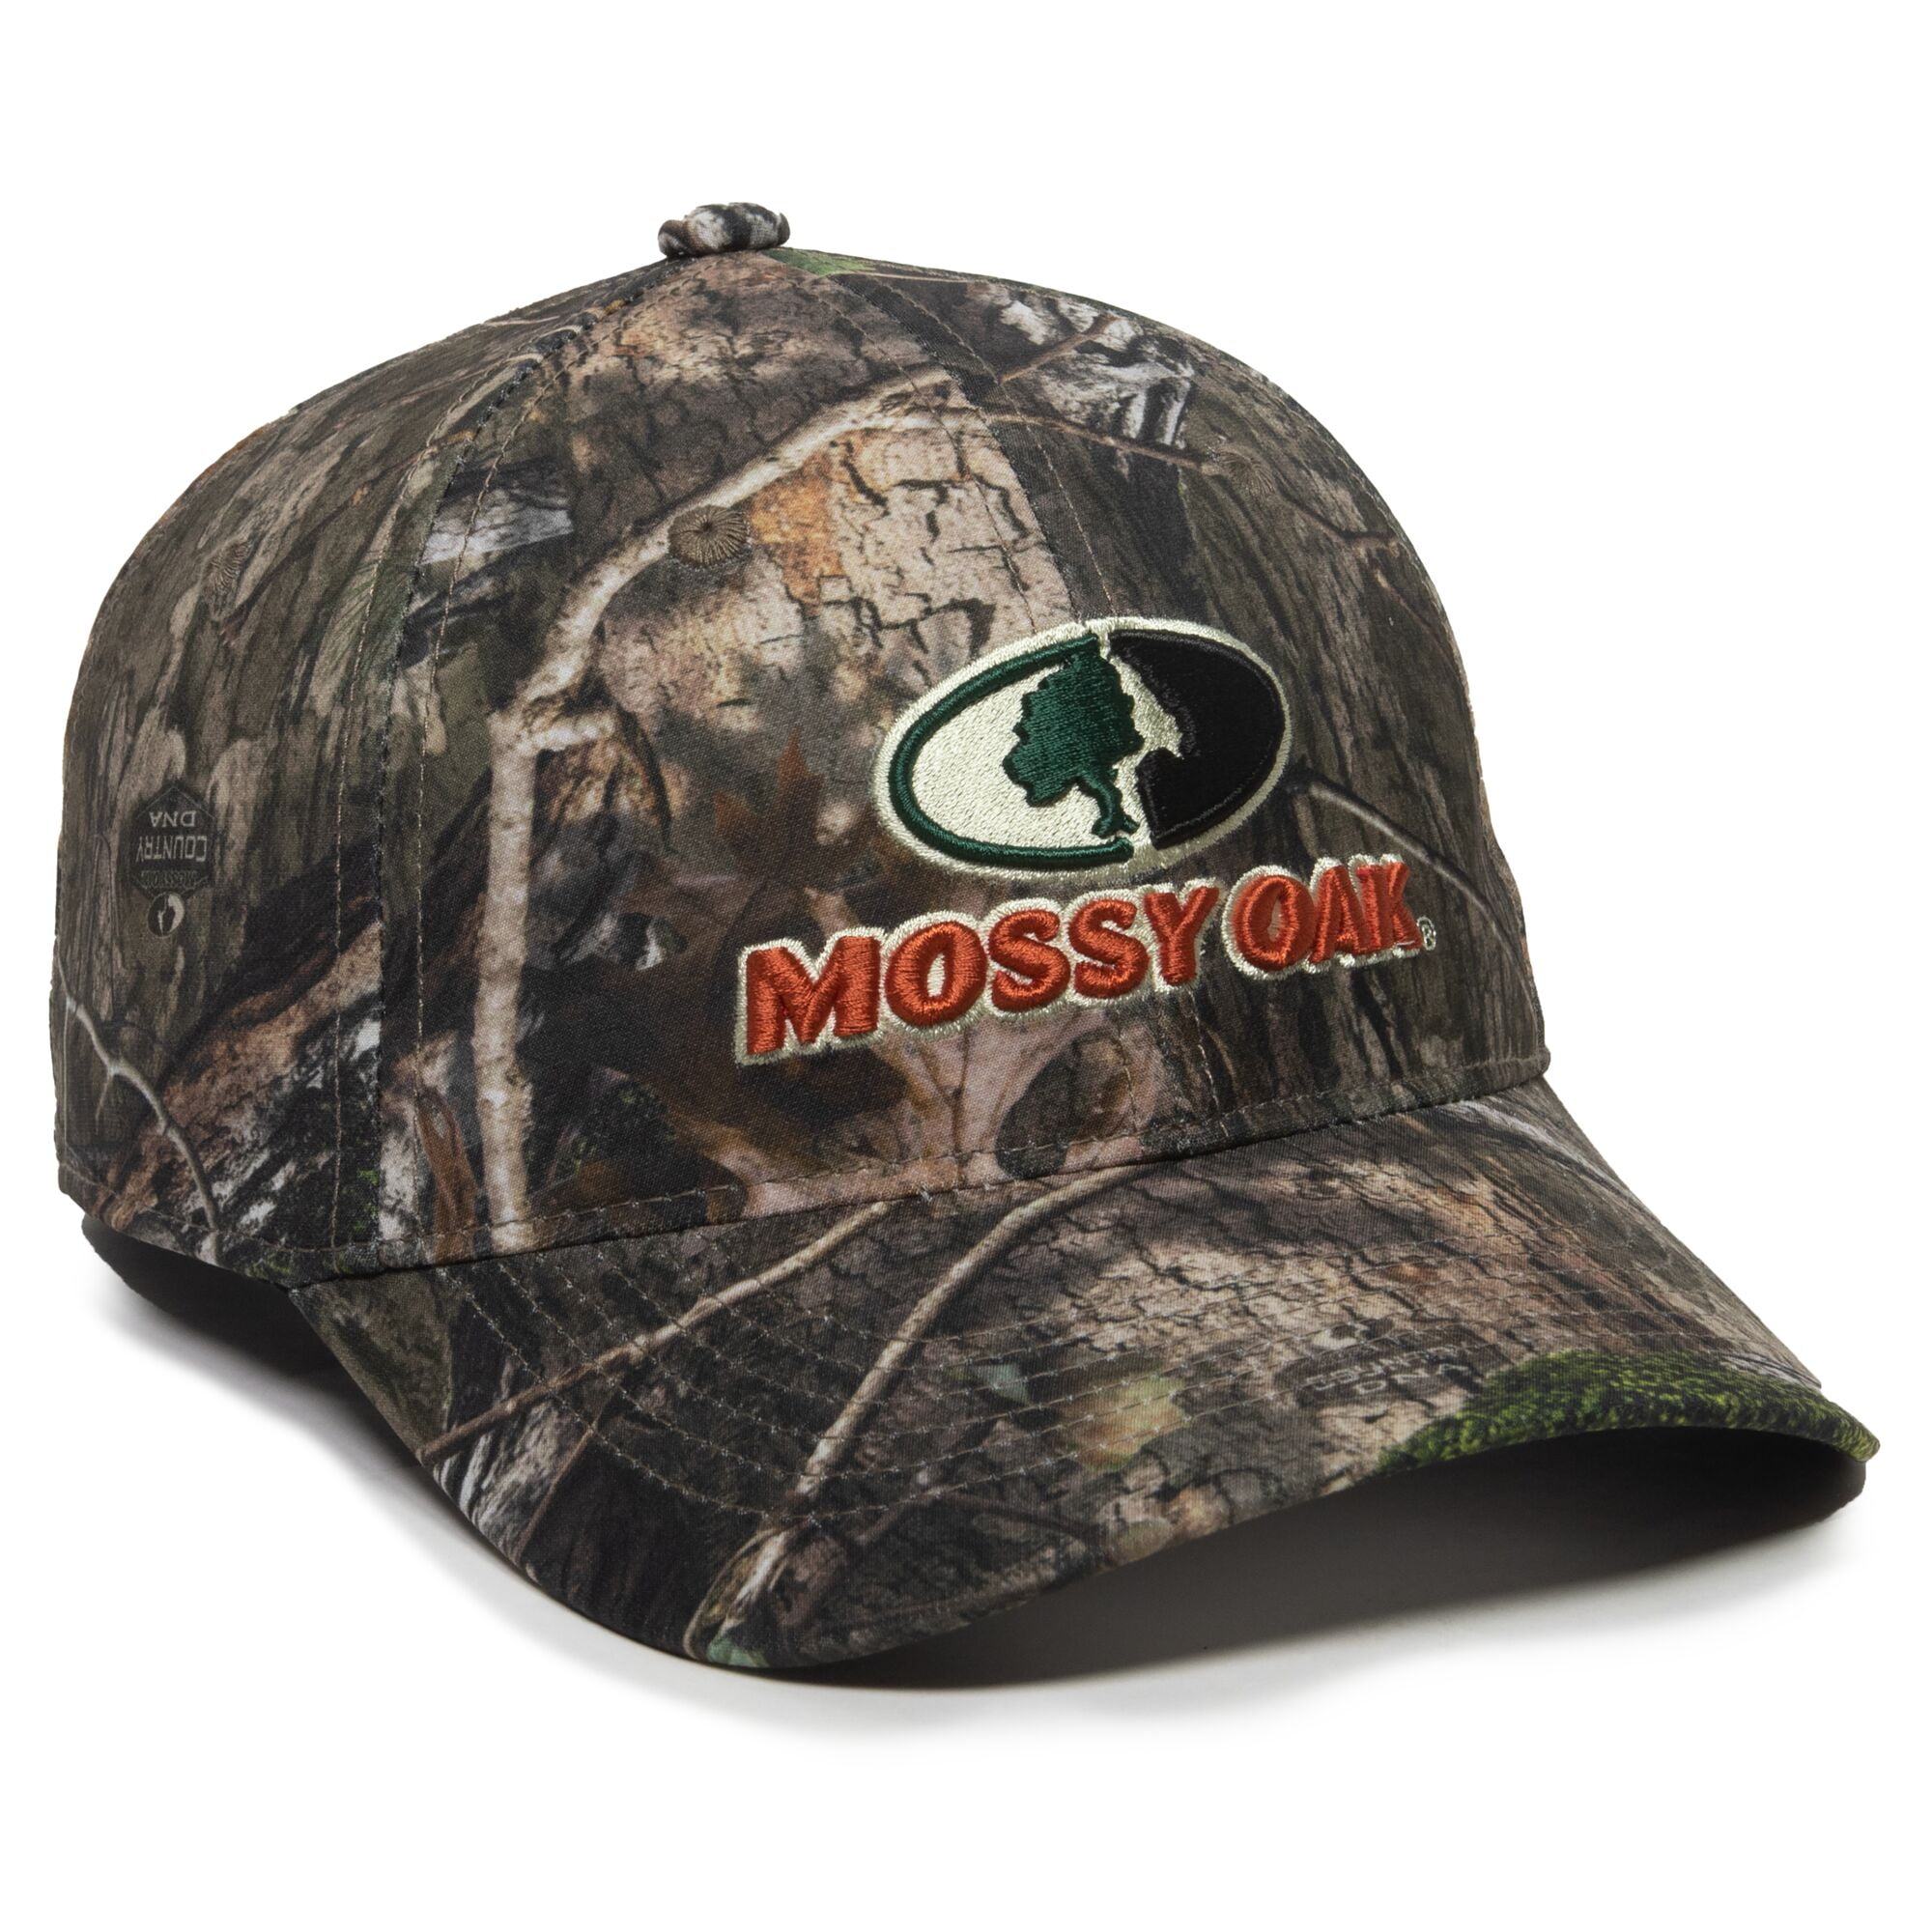 Mossy Oak Structured Baseball Style Hat, Country DNA Camo, Adult